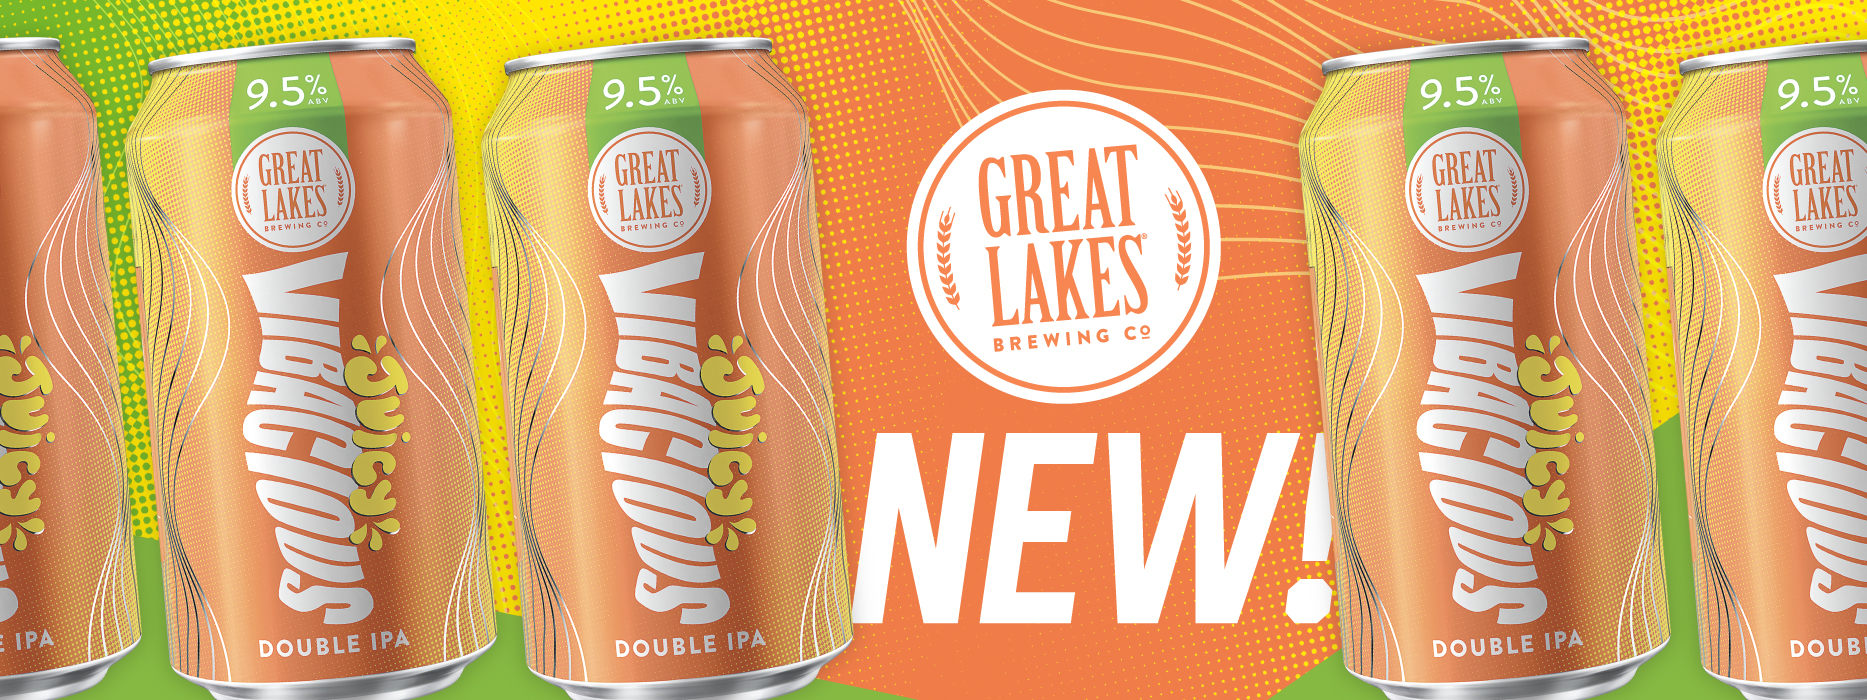 Pattern of Juicy Vibacious Double IPA Cans with Great Lakes Logo and "New"